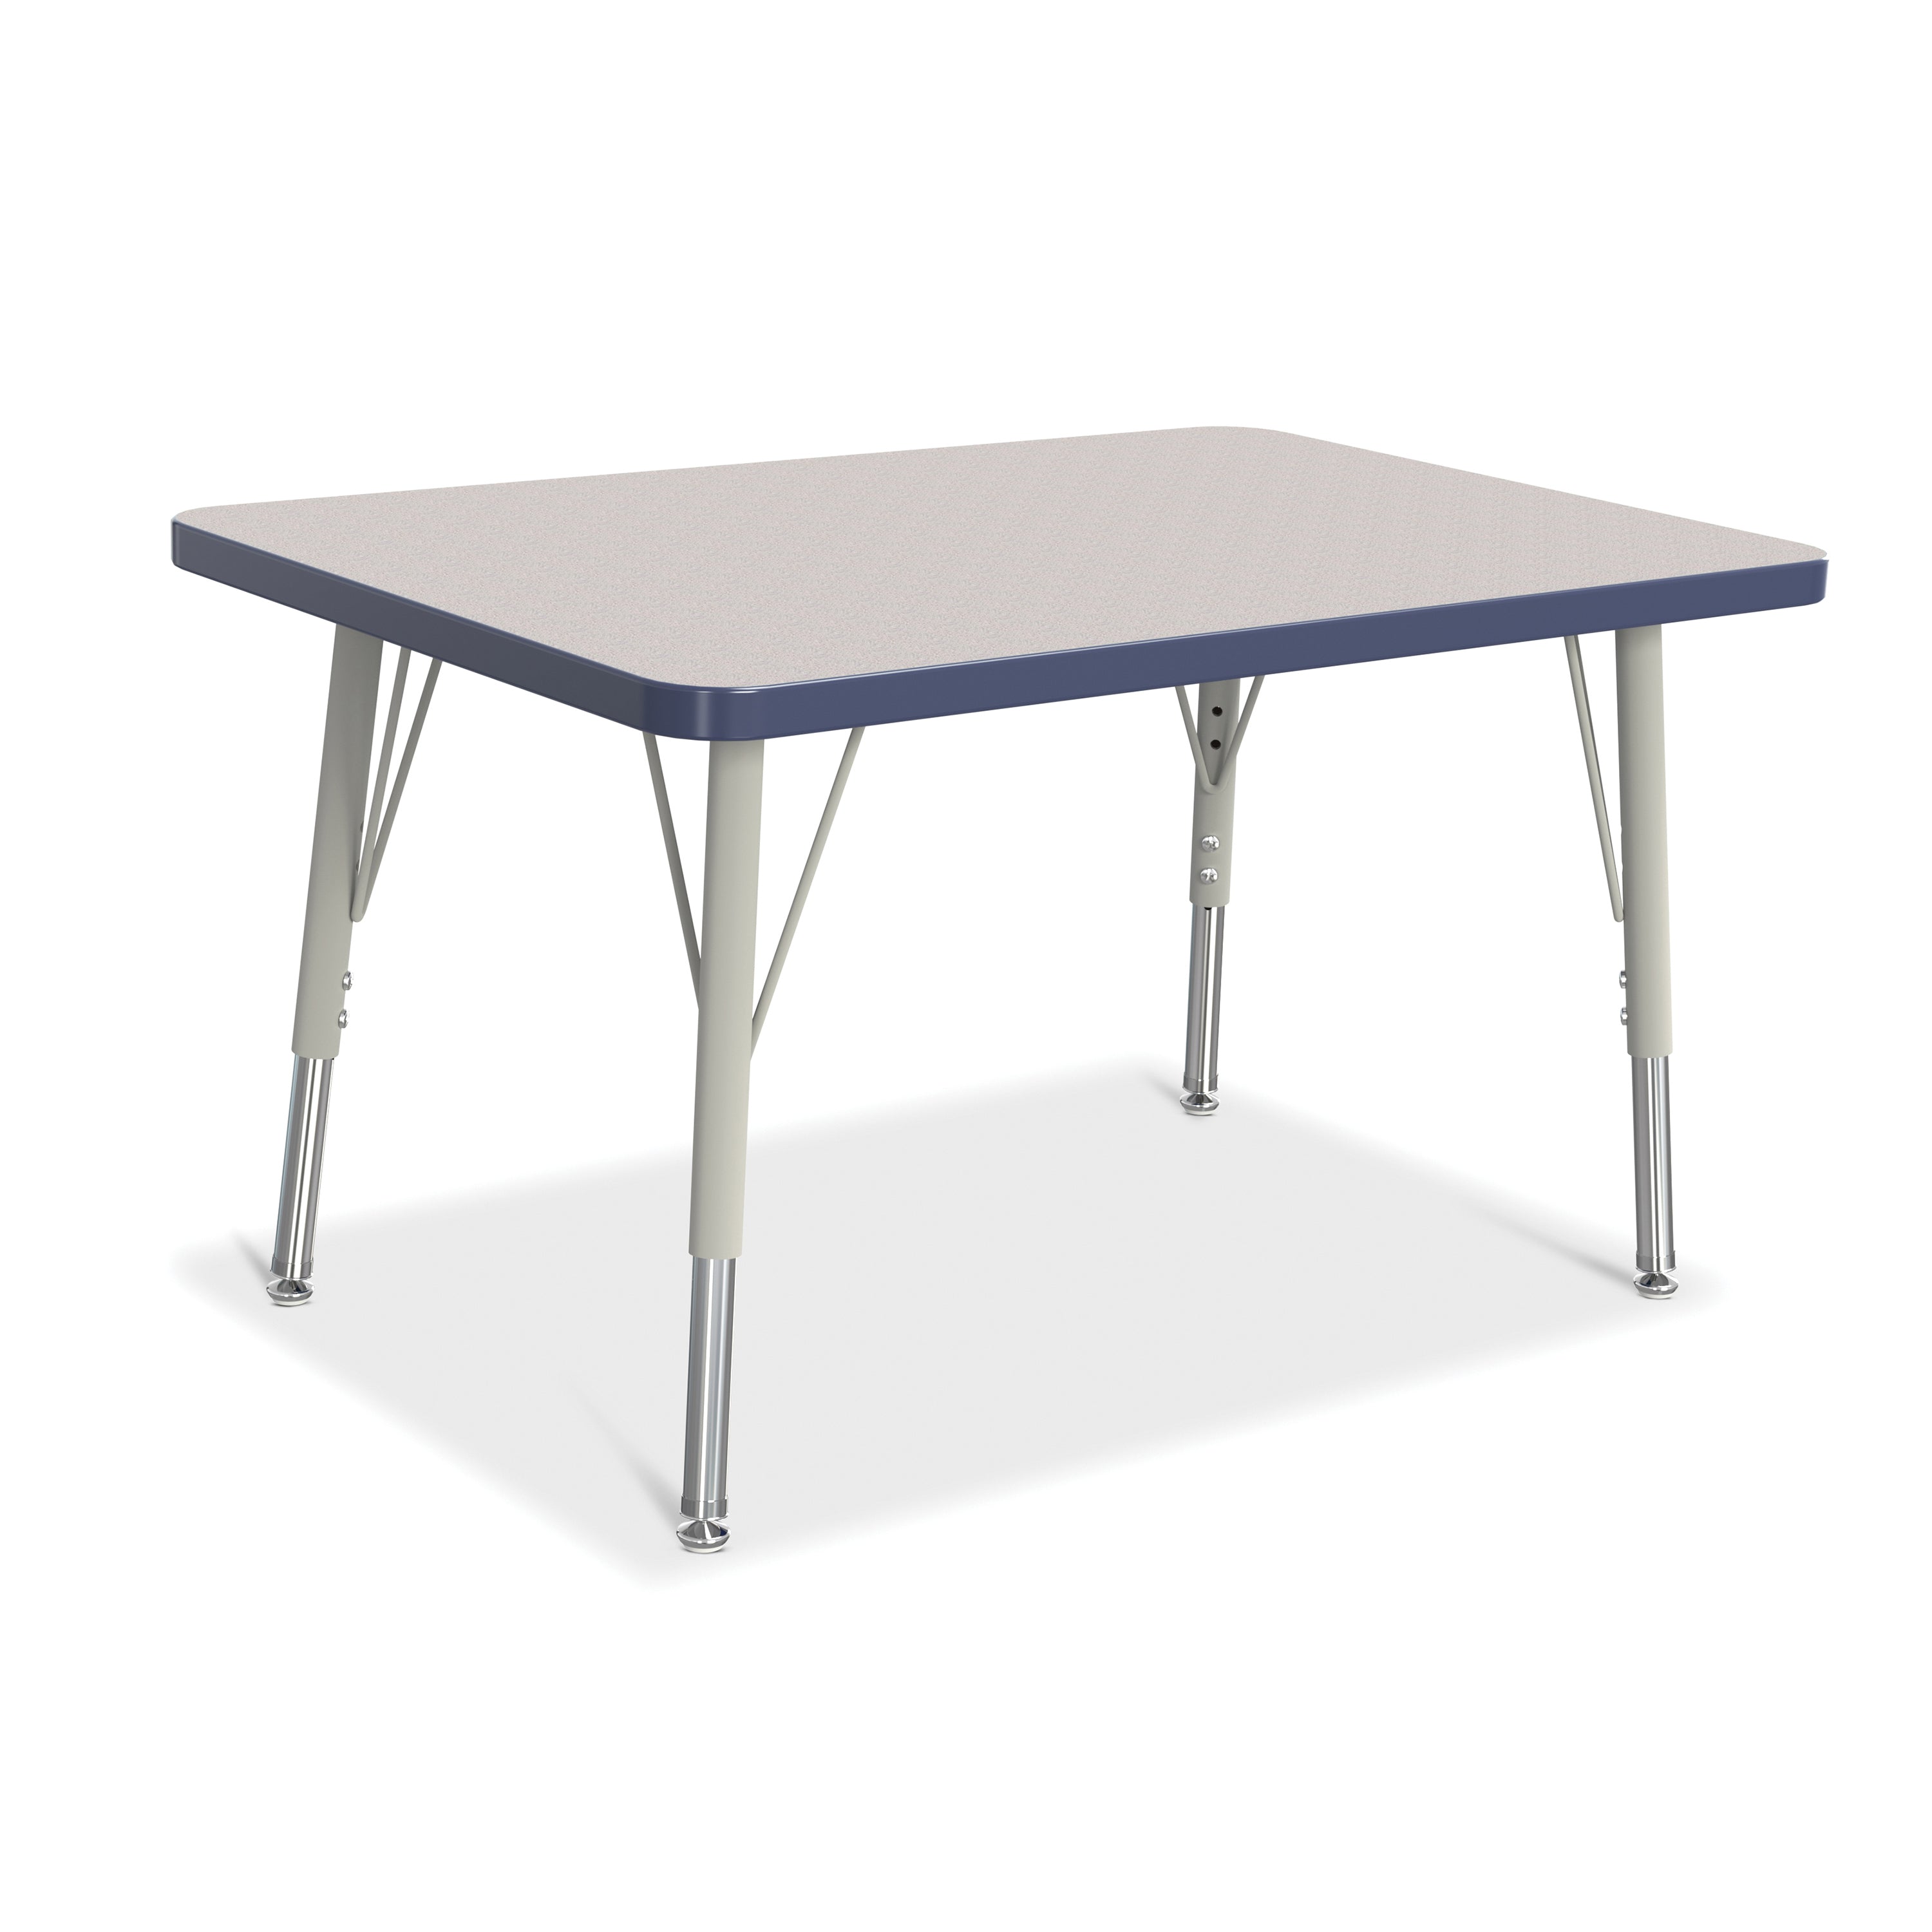 6478JCE112, Berries Rectangle Activity Table - 24" X 36", E-height - Freckled Gray/Navy/Gray